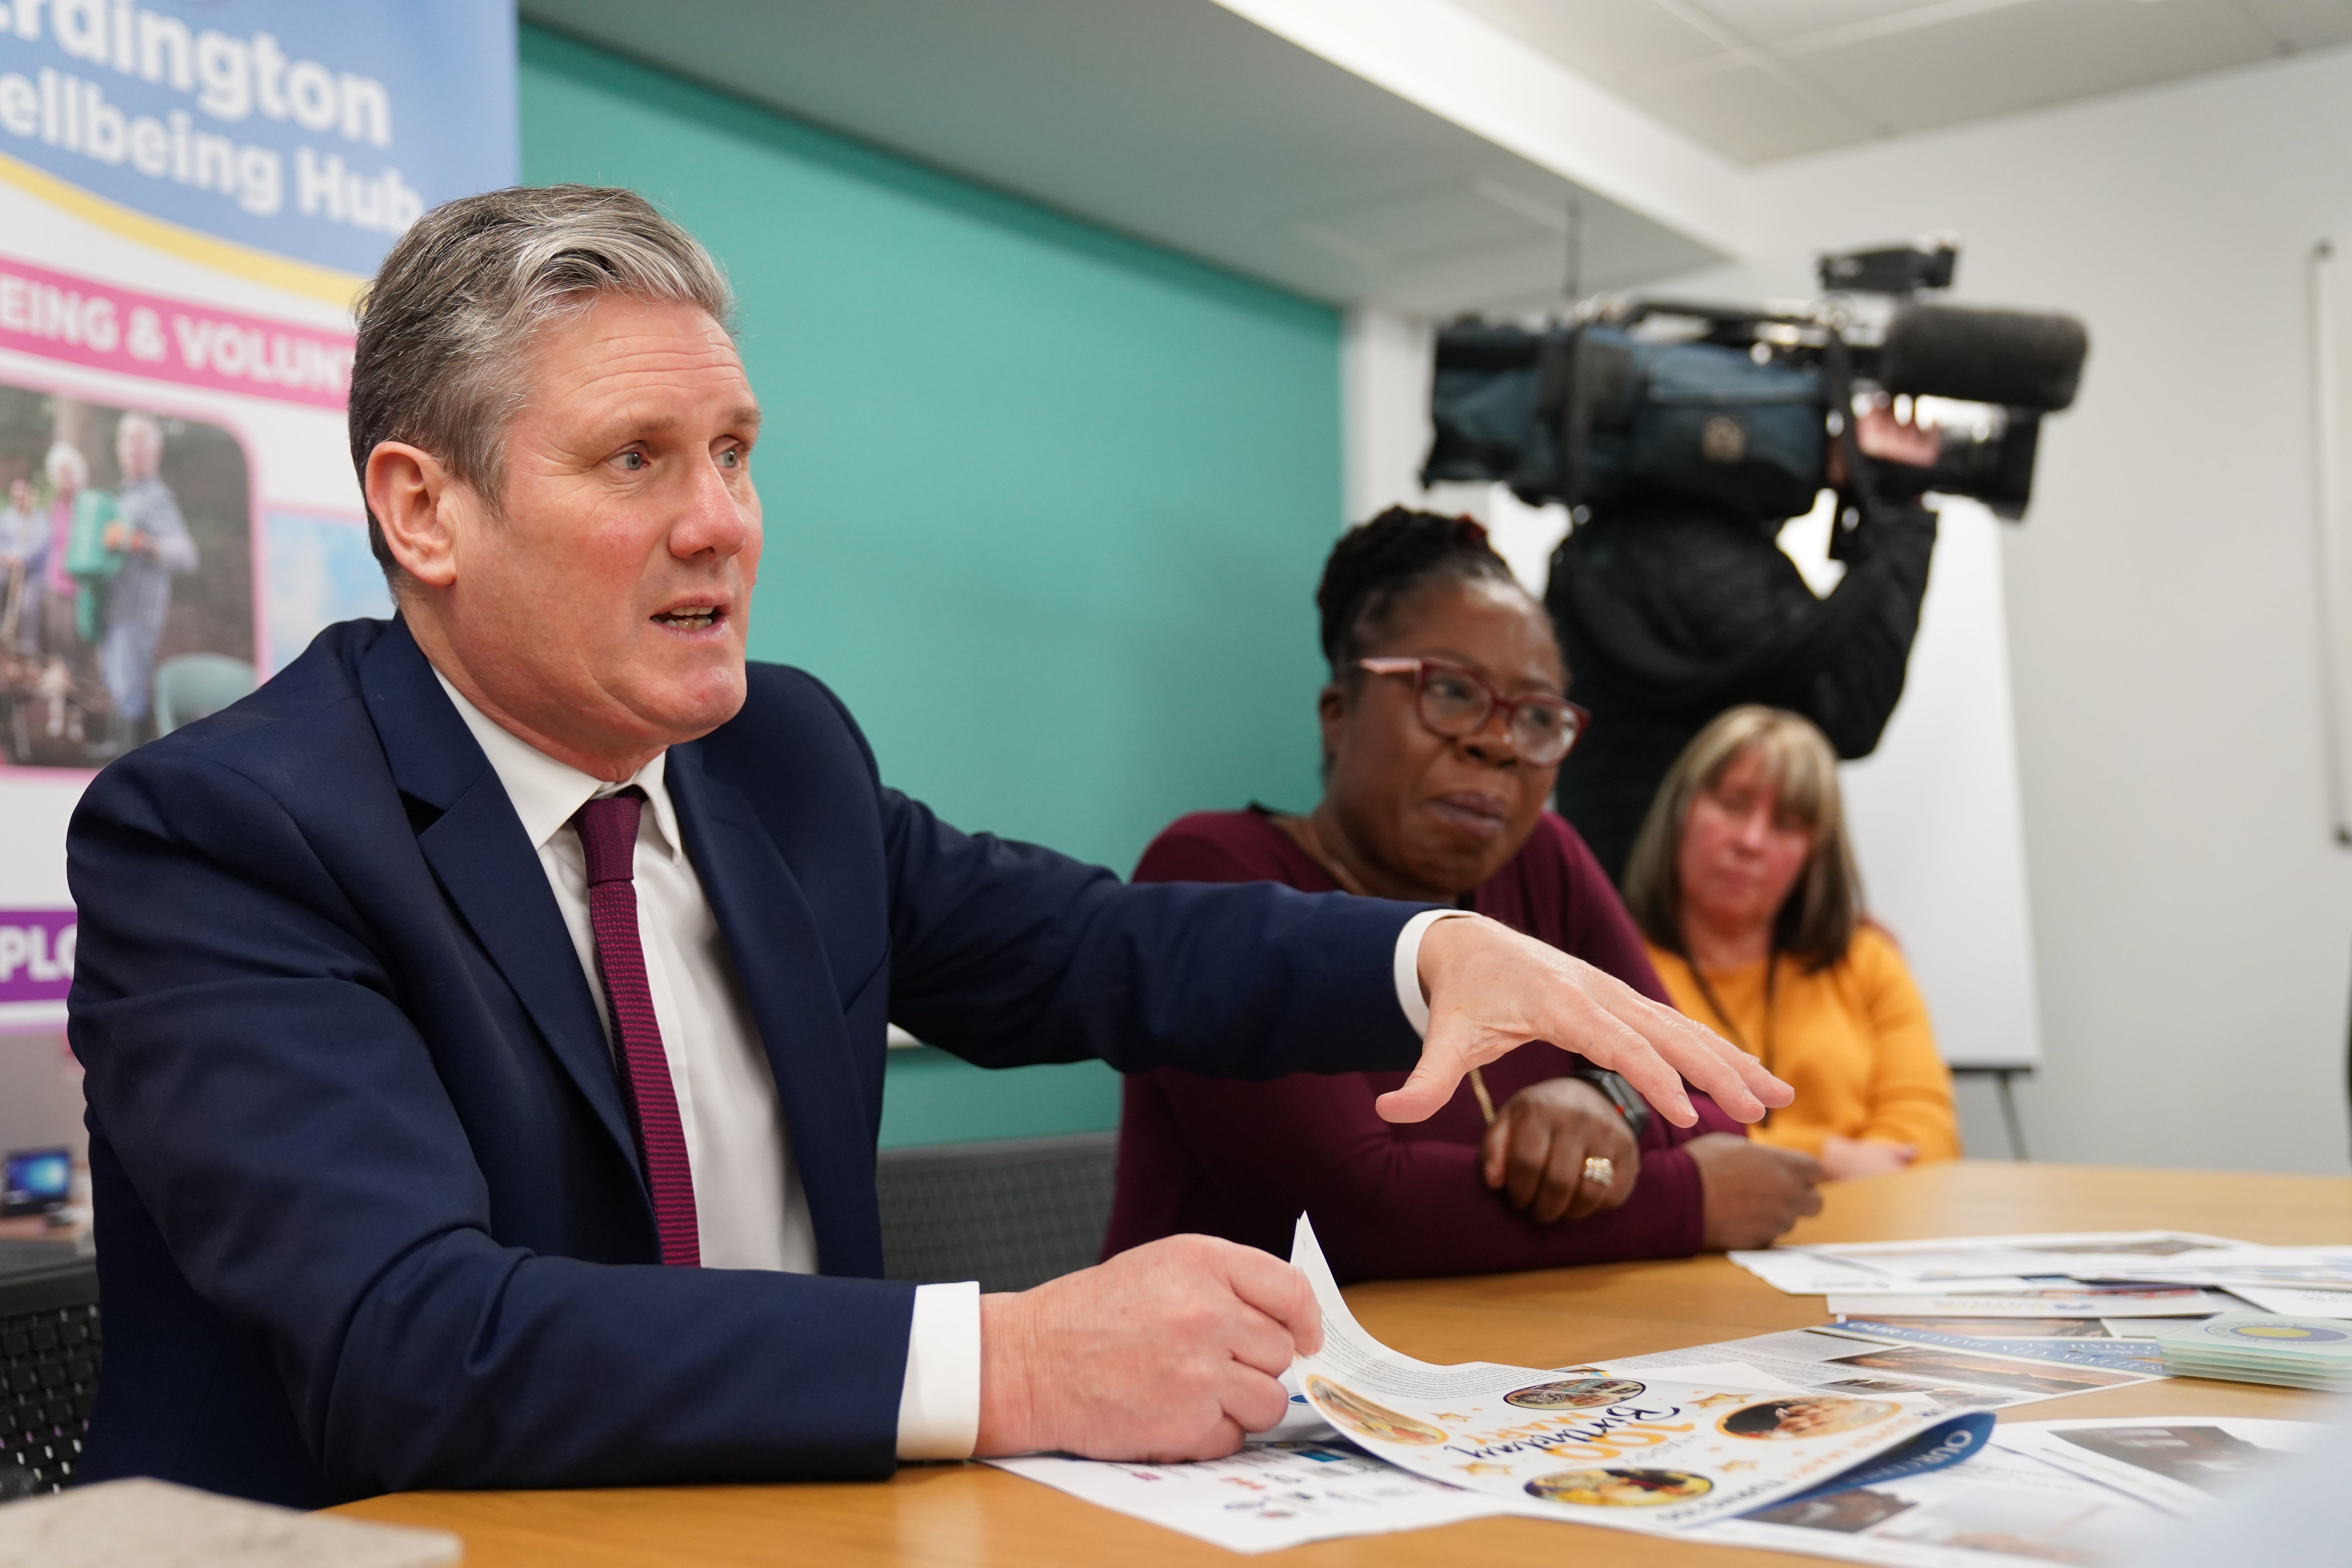 Labour leader Sir Keir Starmer believes ending free testing would be an error (Jacob King/PA)